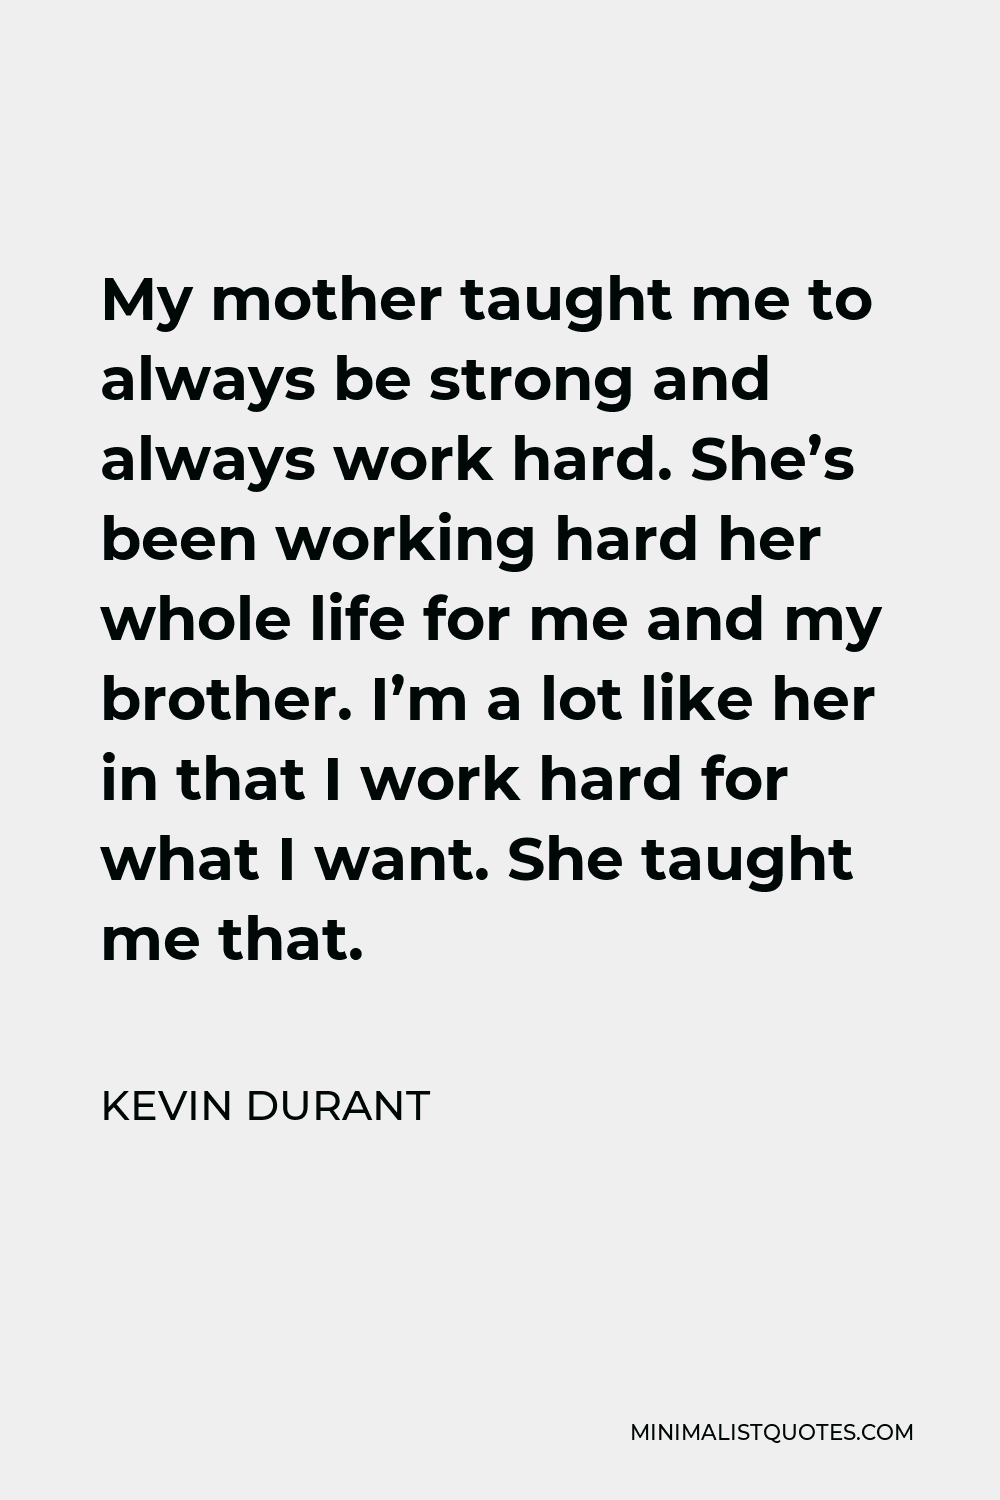 Kevin Durant Quote - My mother taught me to always be strong and always work hard. She’s been working hard her whole life for me and my brother. I’m a lot like her in that I work hard for what I want. She taught me that.